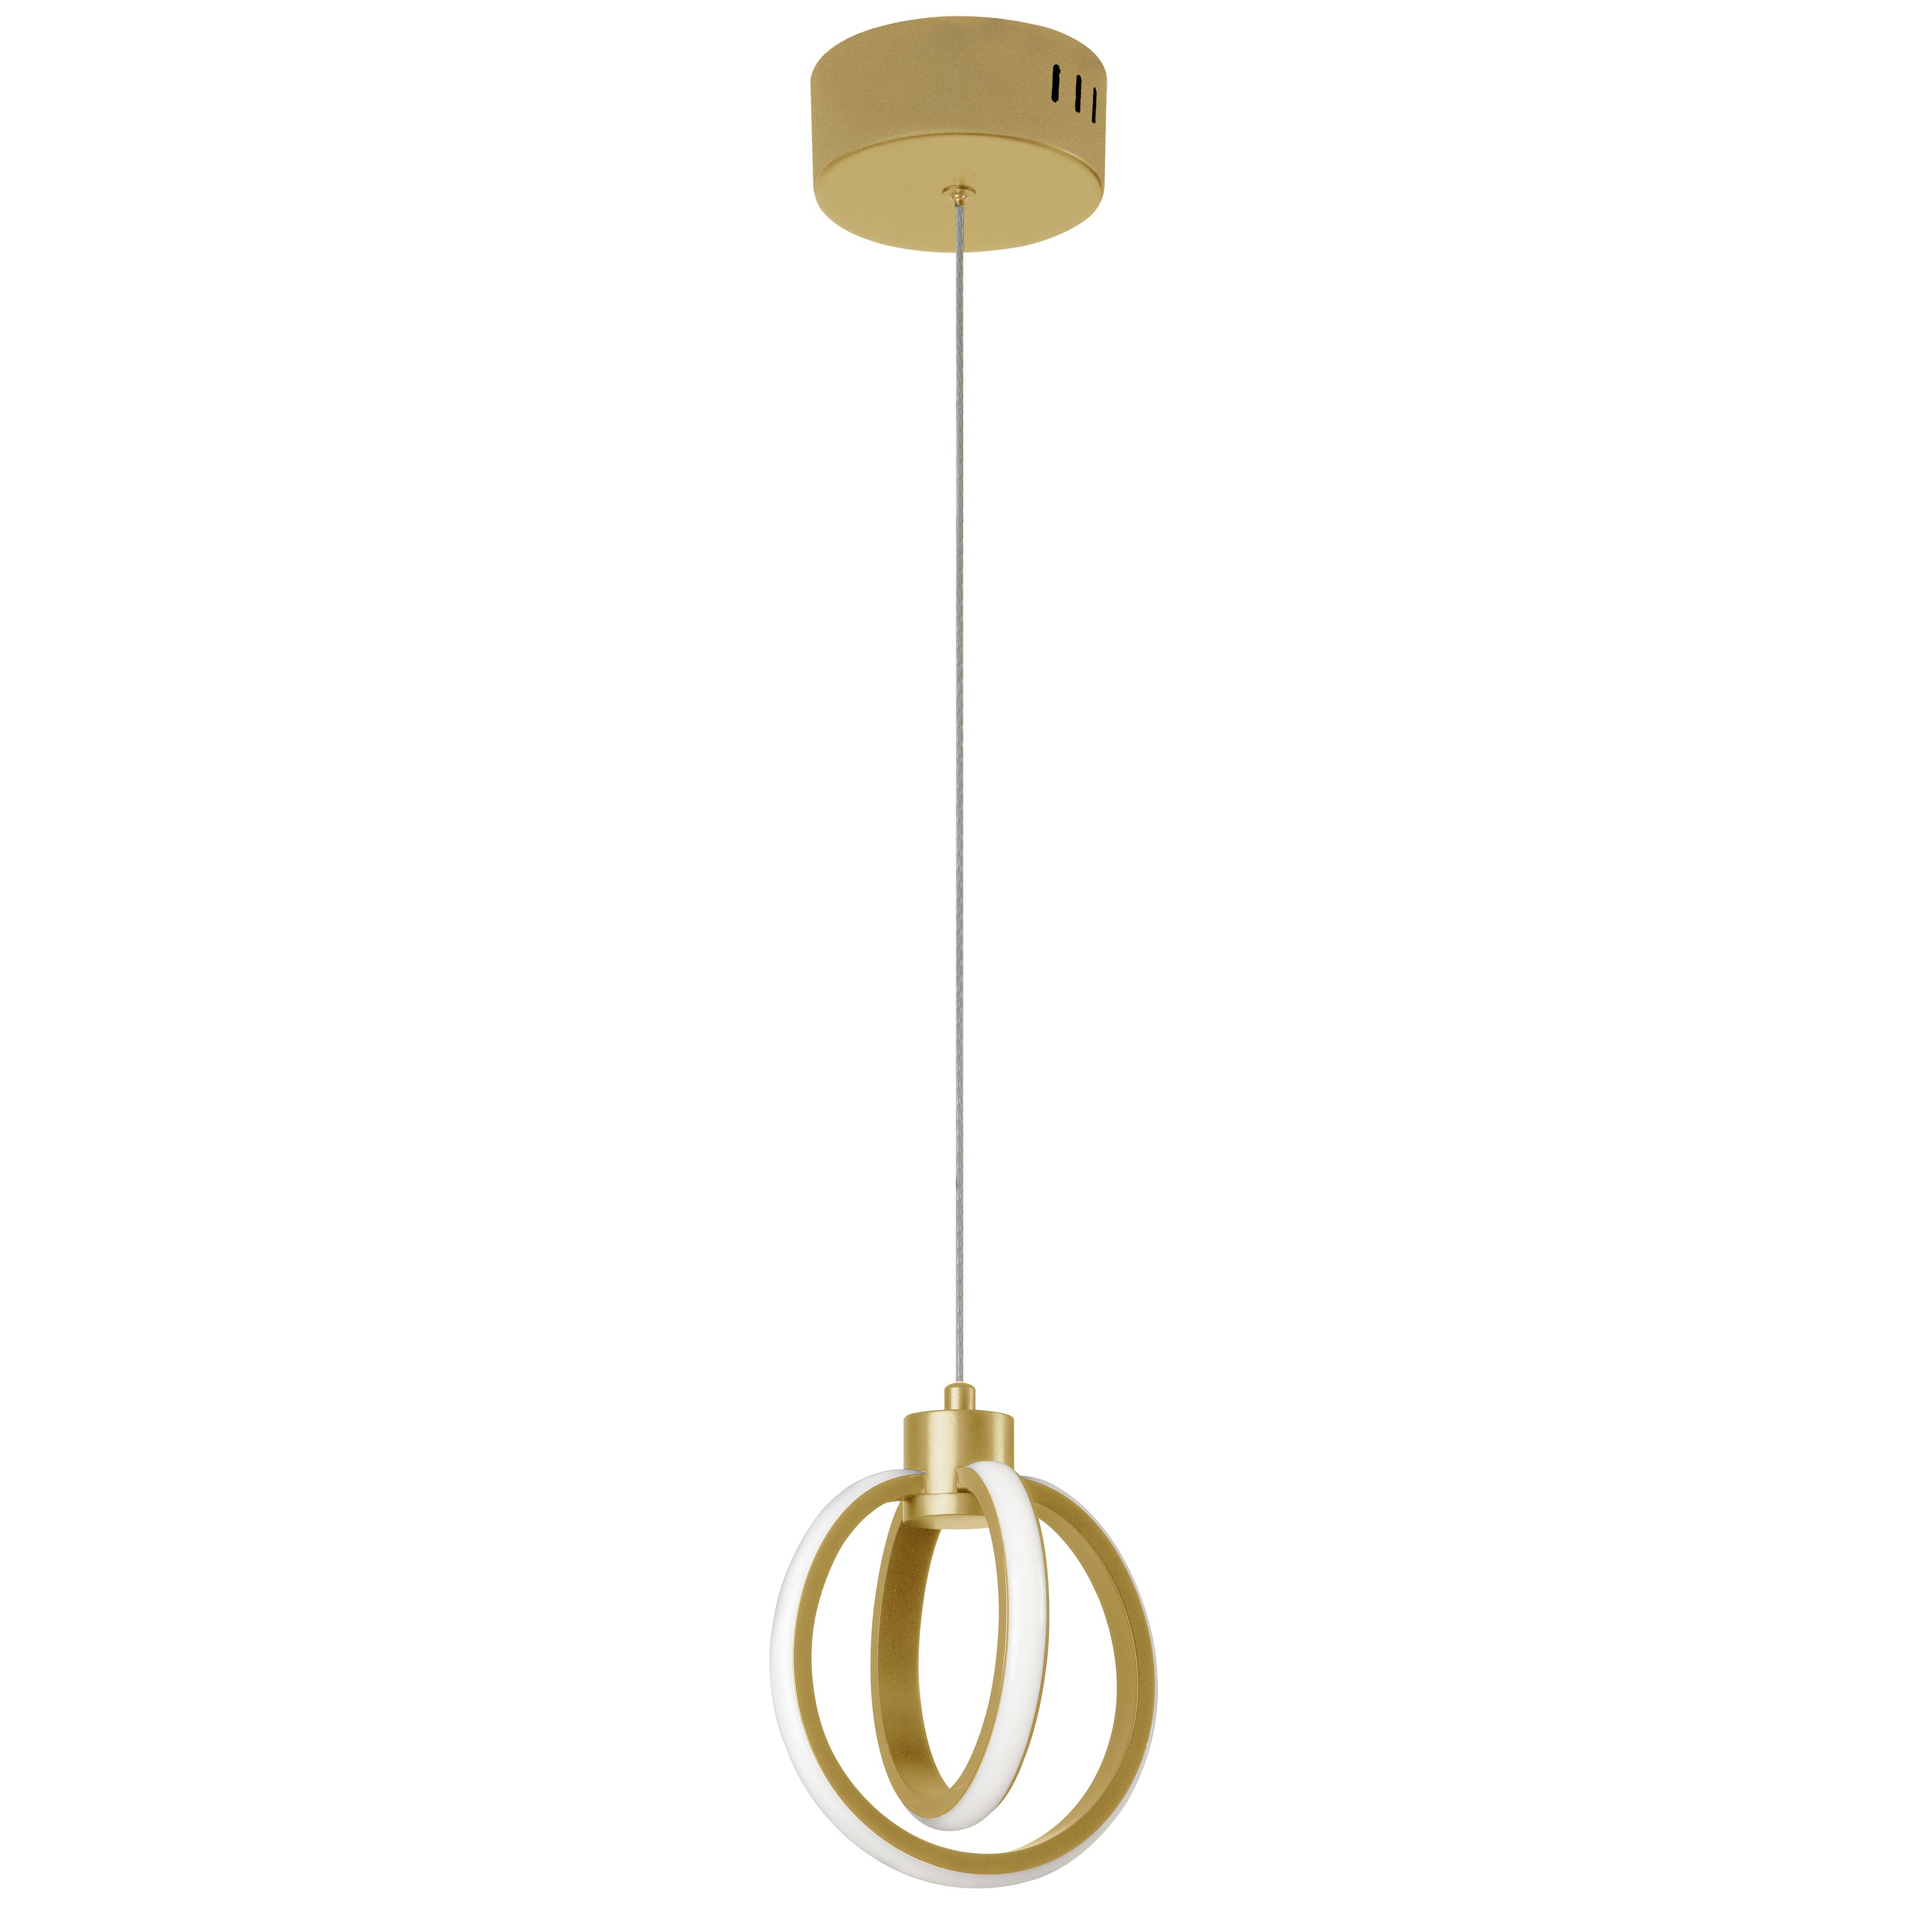 Dainolite Parson - 9228-614LEDP-AGB - 14W Pendant, Aged Brass with White Silicone Diffuser - Aged Brass